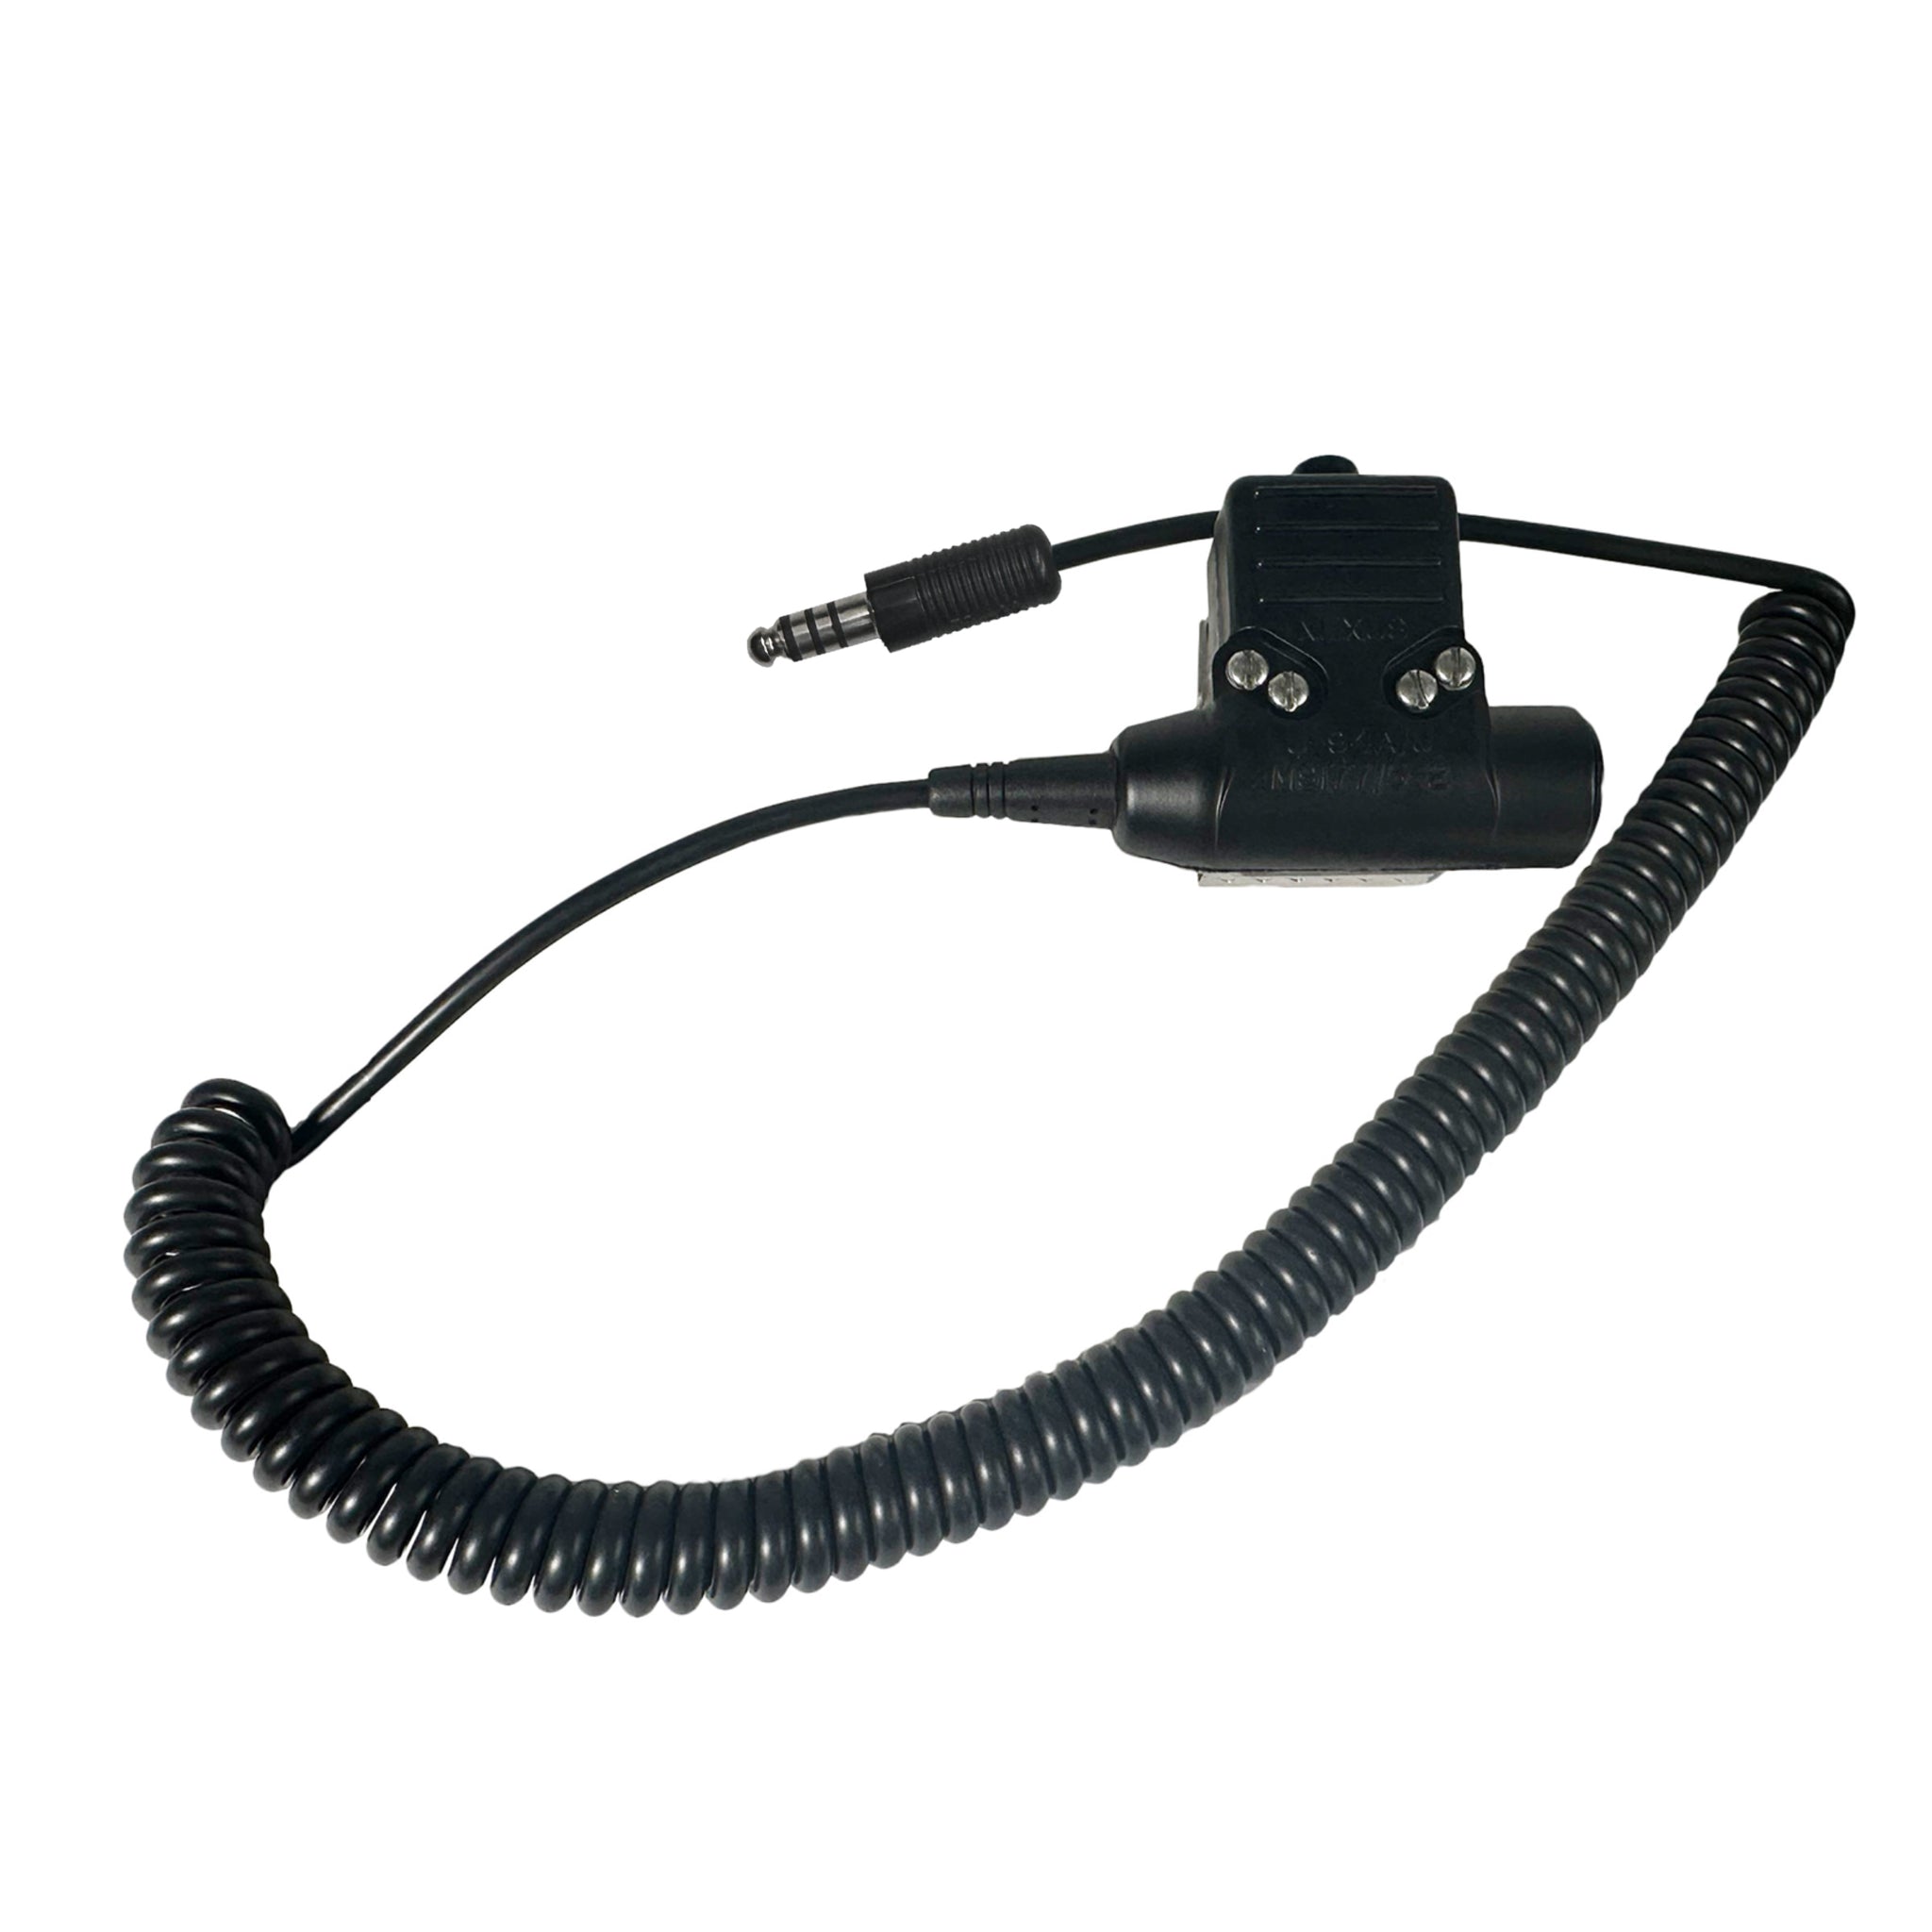 Pilot PA50H Helicopter Press-to-Talk Switch